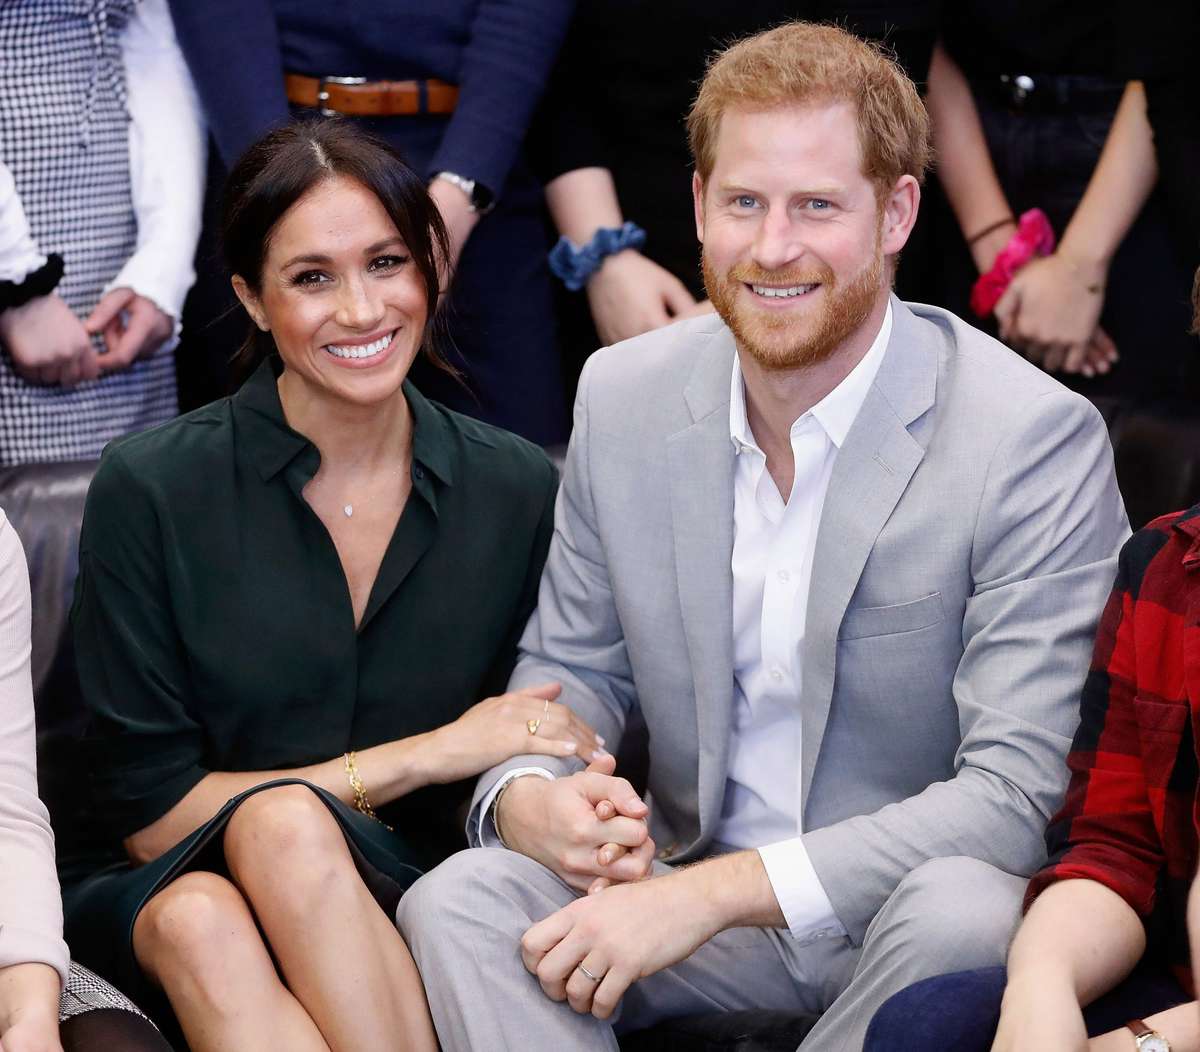 Prince Harry Says "History Was Repeating Itself" With His Wife Meghan Markle